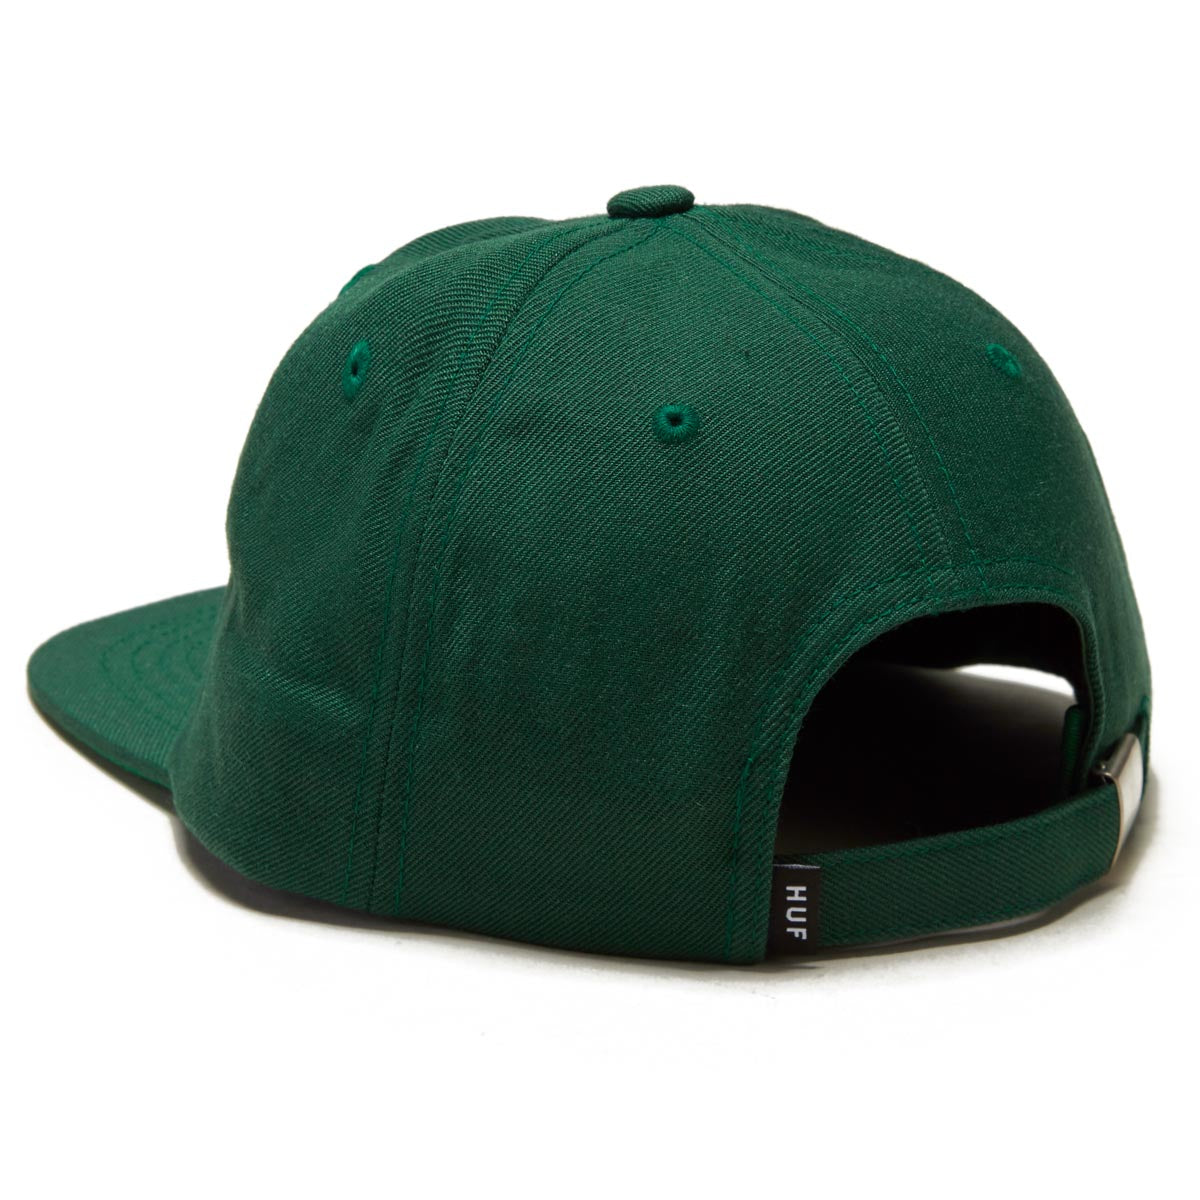 HUF Moab H 6 Panel Hat - Forest Green image 2